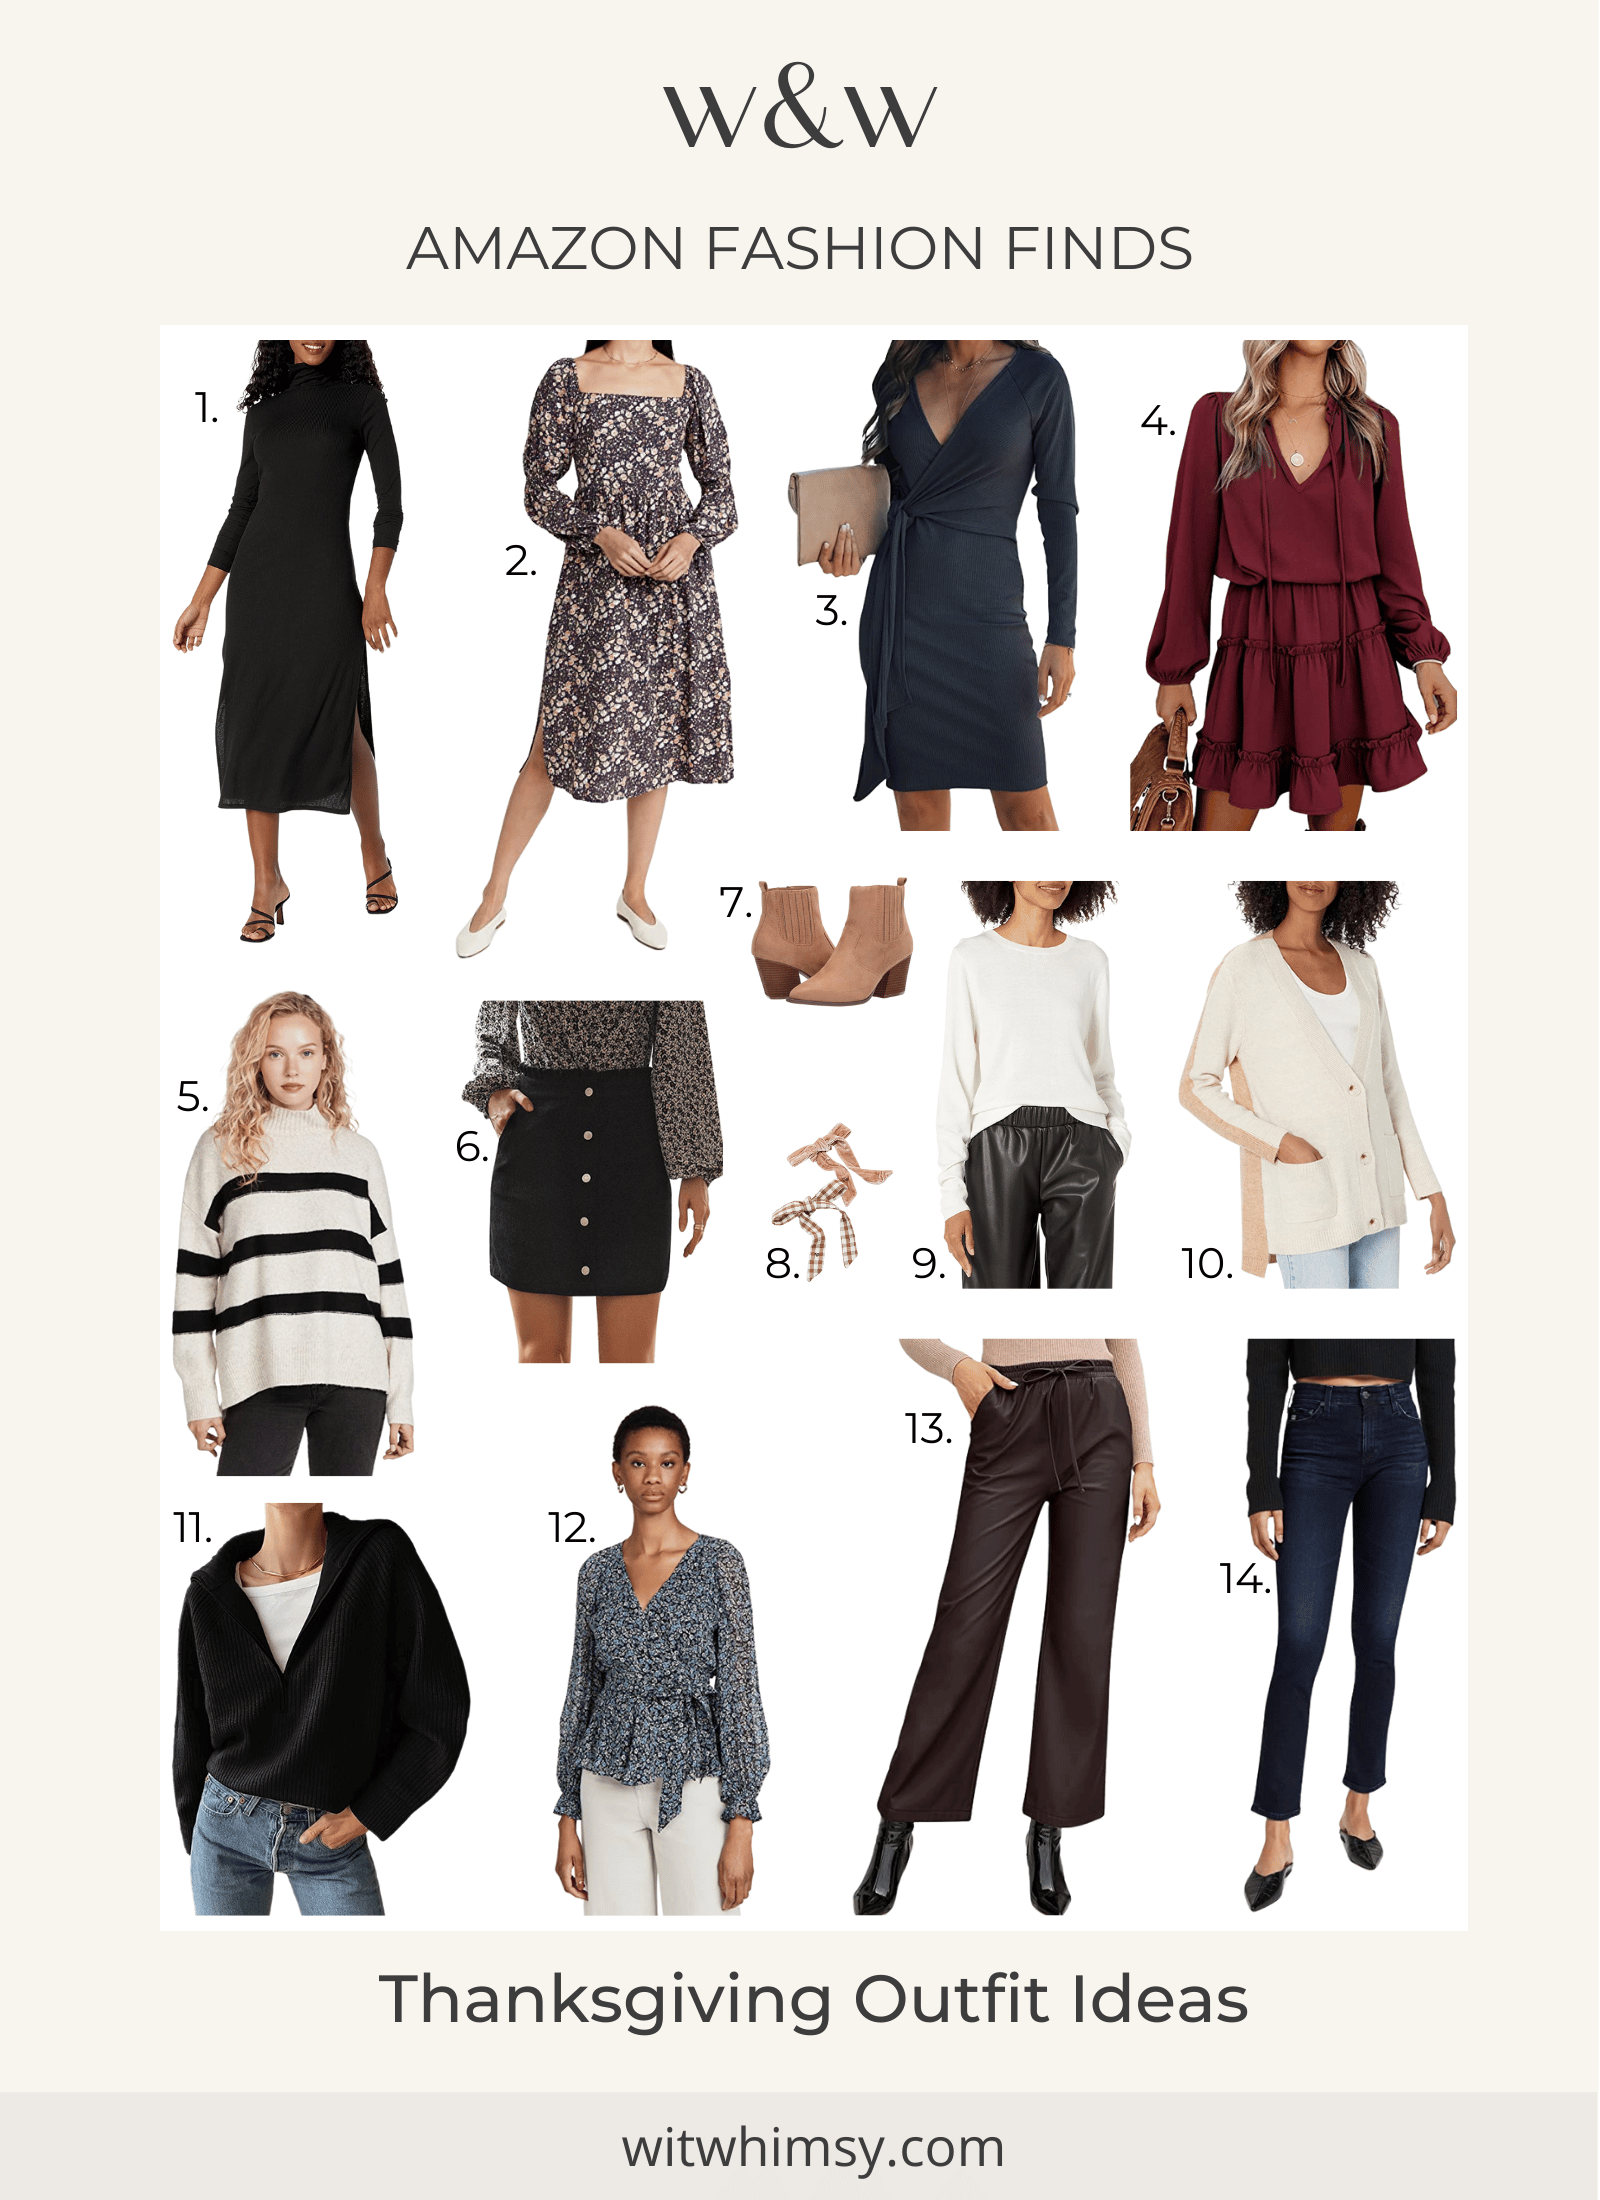 Thanksgiving Outfit Ideas from Amazon Fashion - wit & whimsy